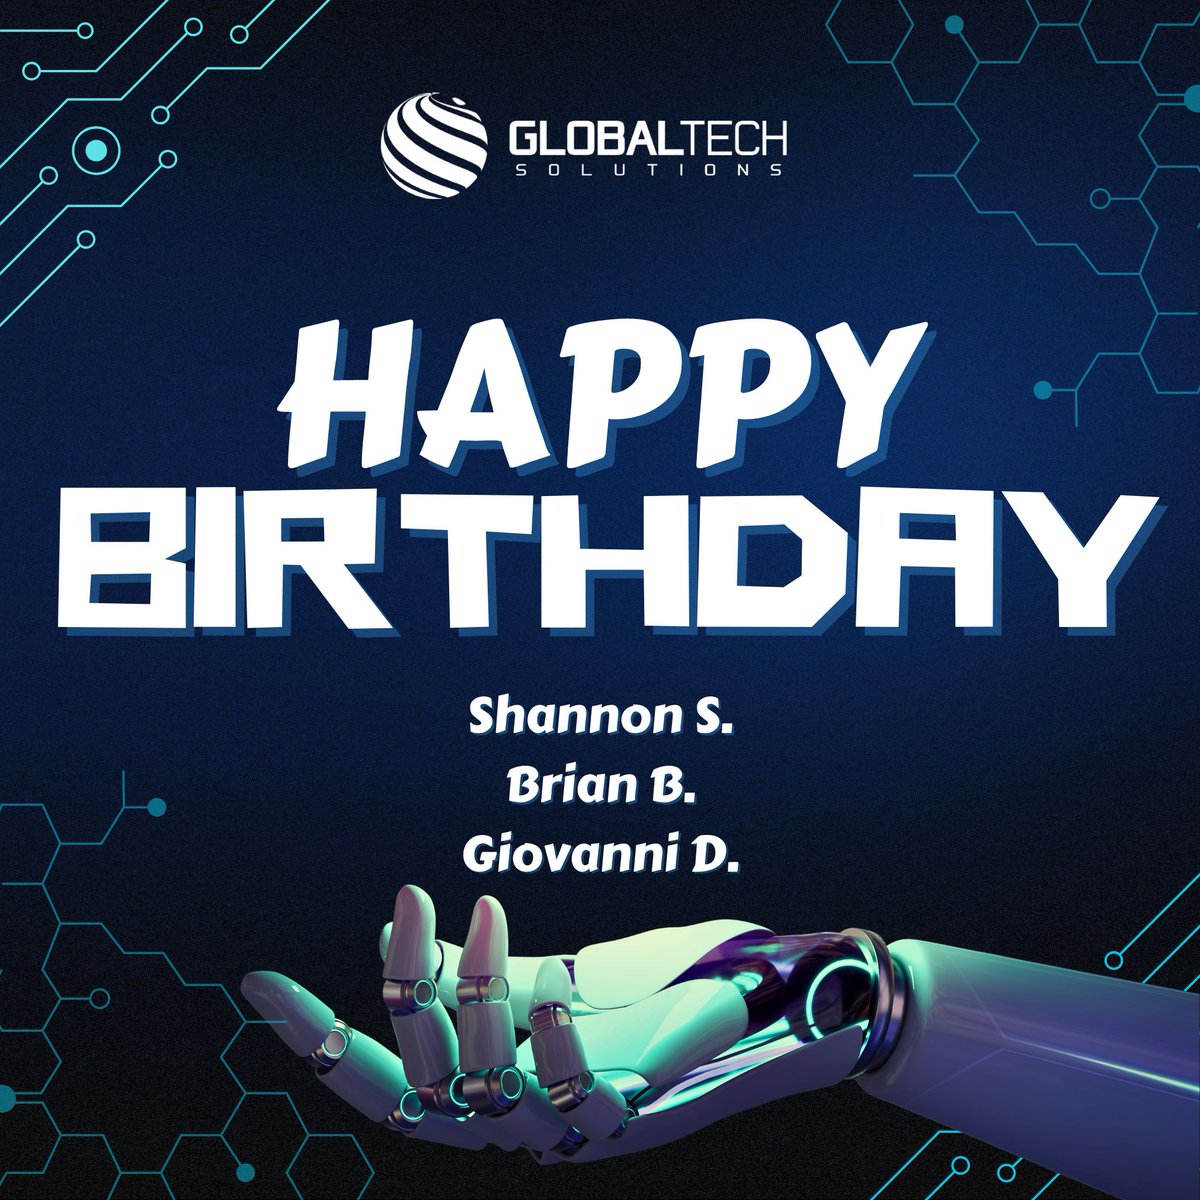 We are thrilled to acknowledge and celebrate our exceptional team whose birthday is in May. 🎉We wish you a very happy birthday! #globaltechsolutions #happybirthday #leaveITtous #happybirthdaytoyou #birthdaycelebration #inc5000 #managedIT